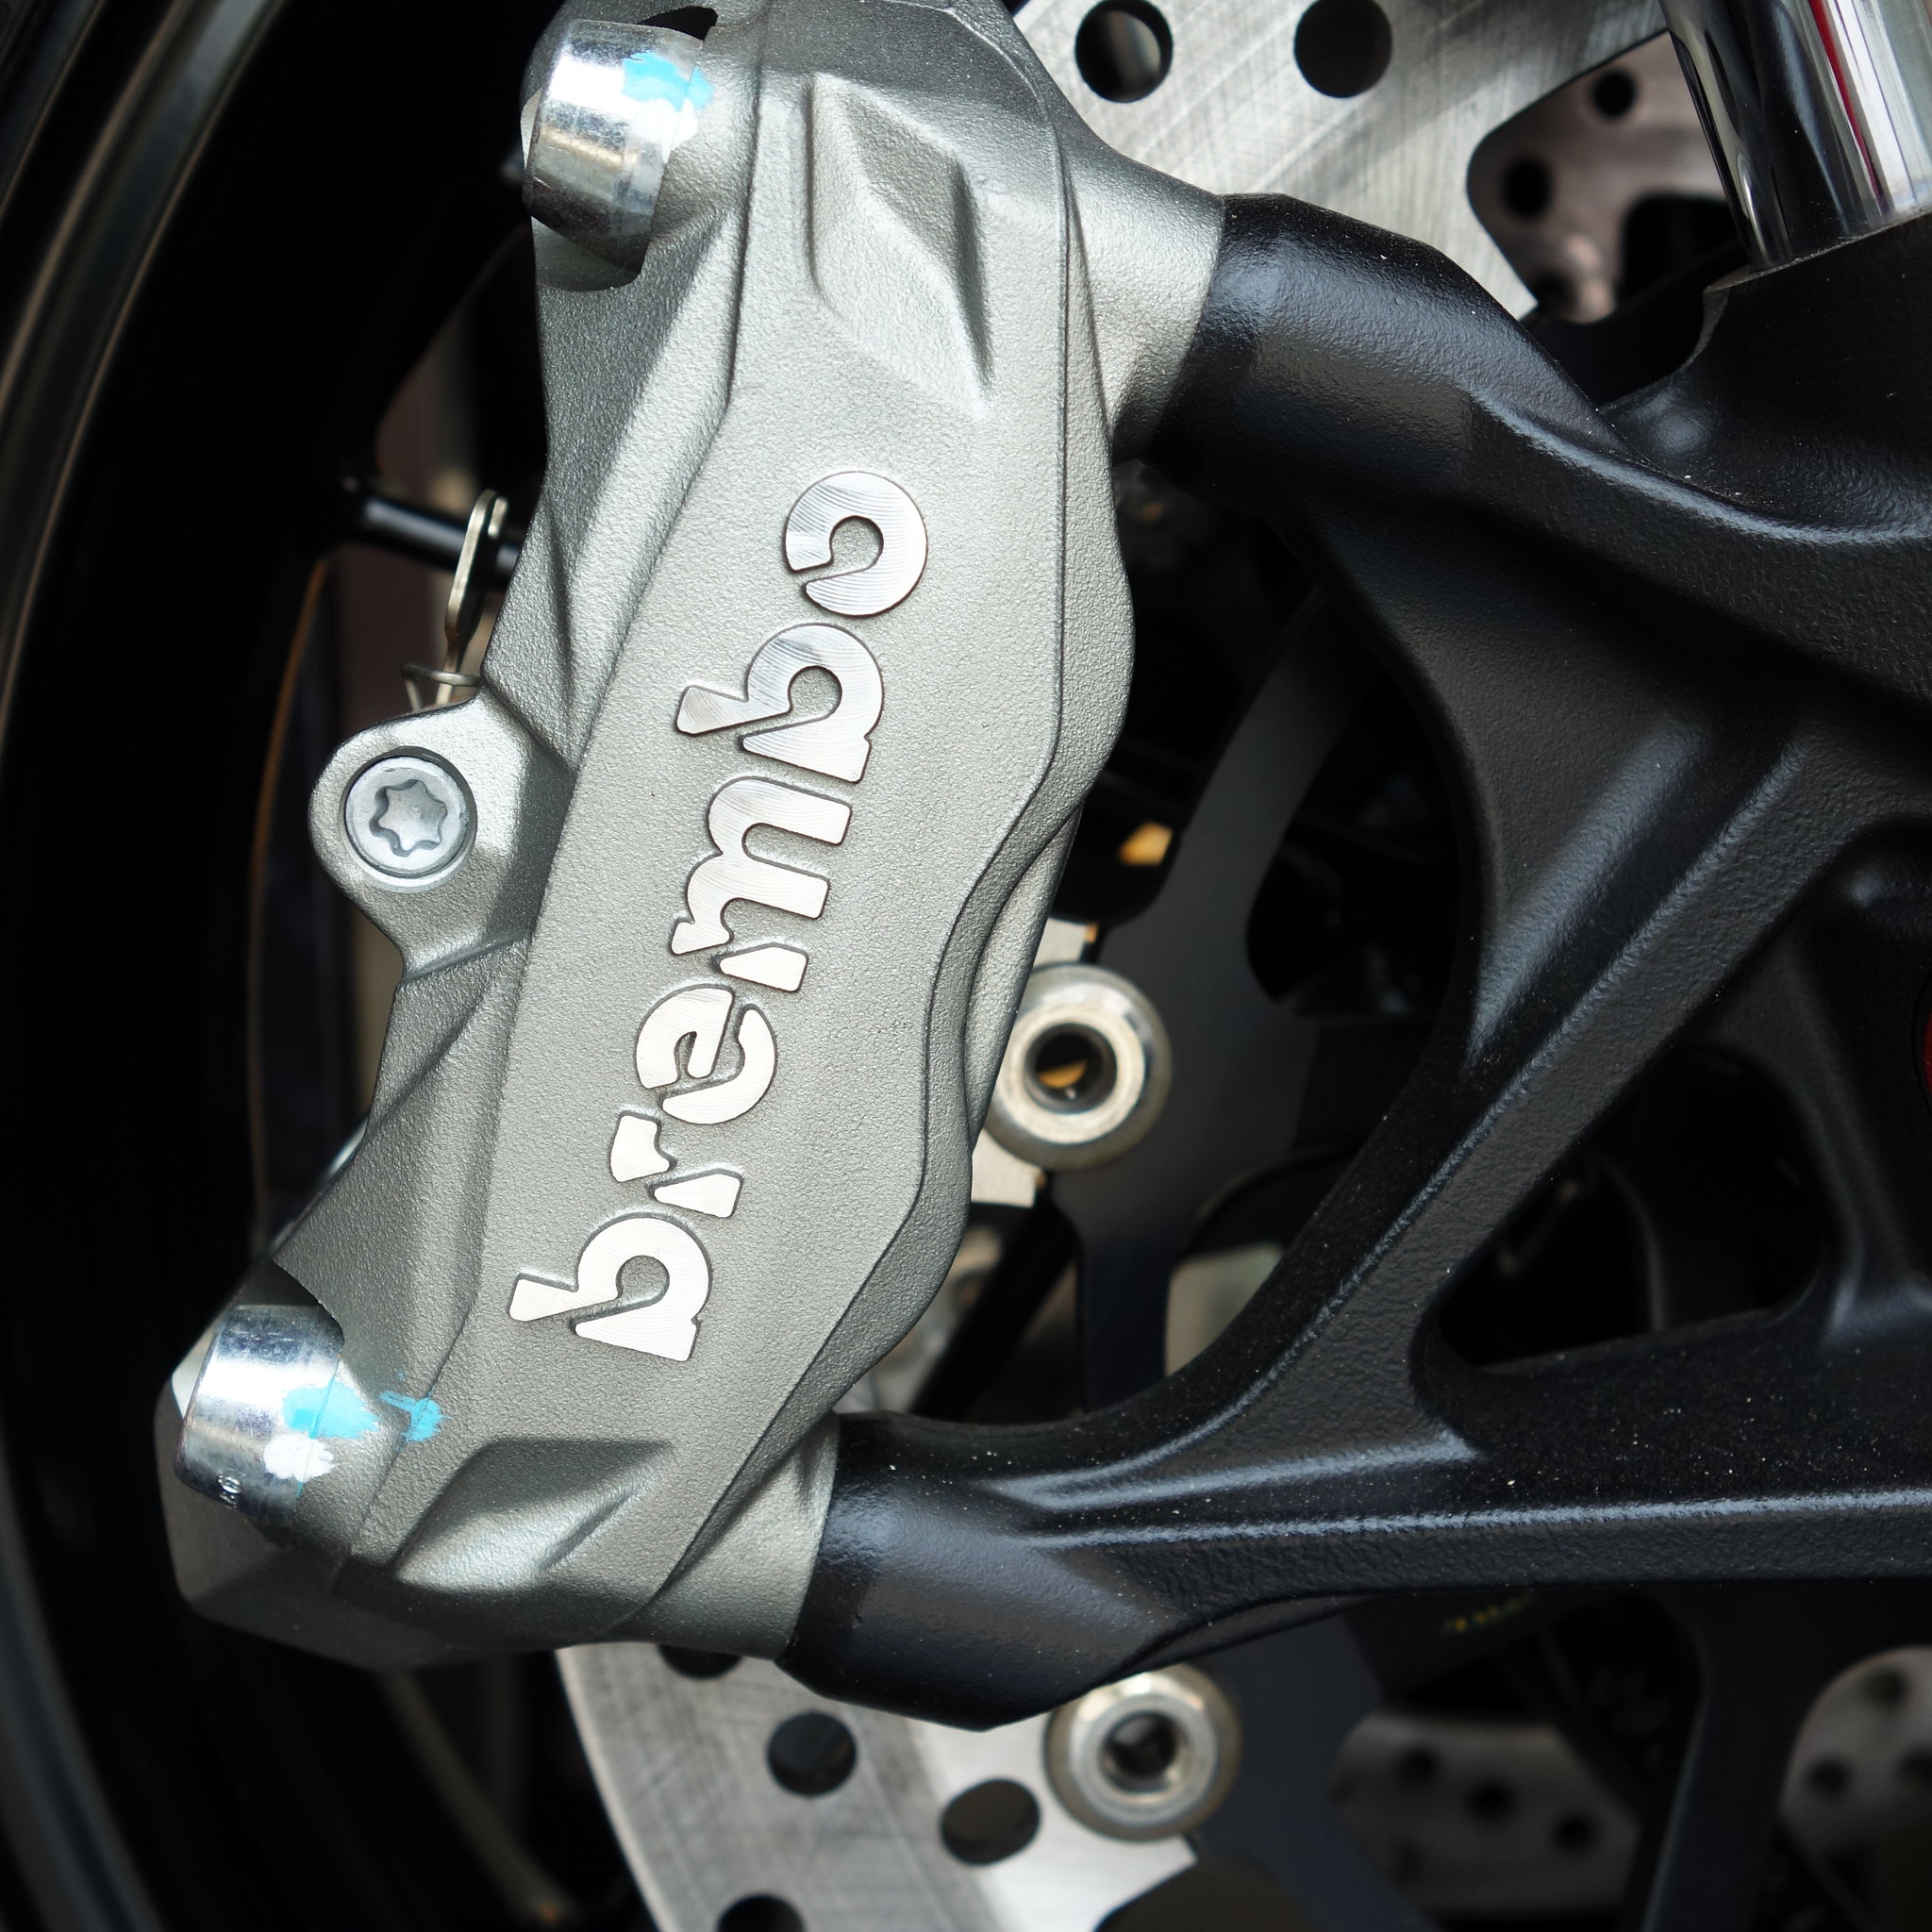 Italian auto suppliers ‘at risk’ if supply chain remains closed – Brembo chairman